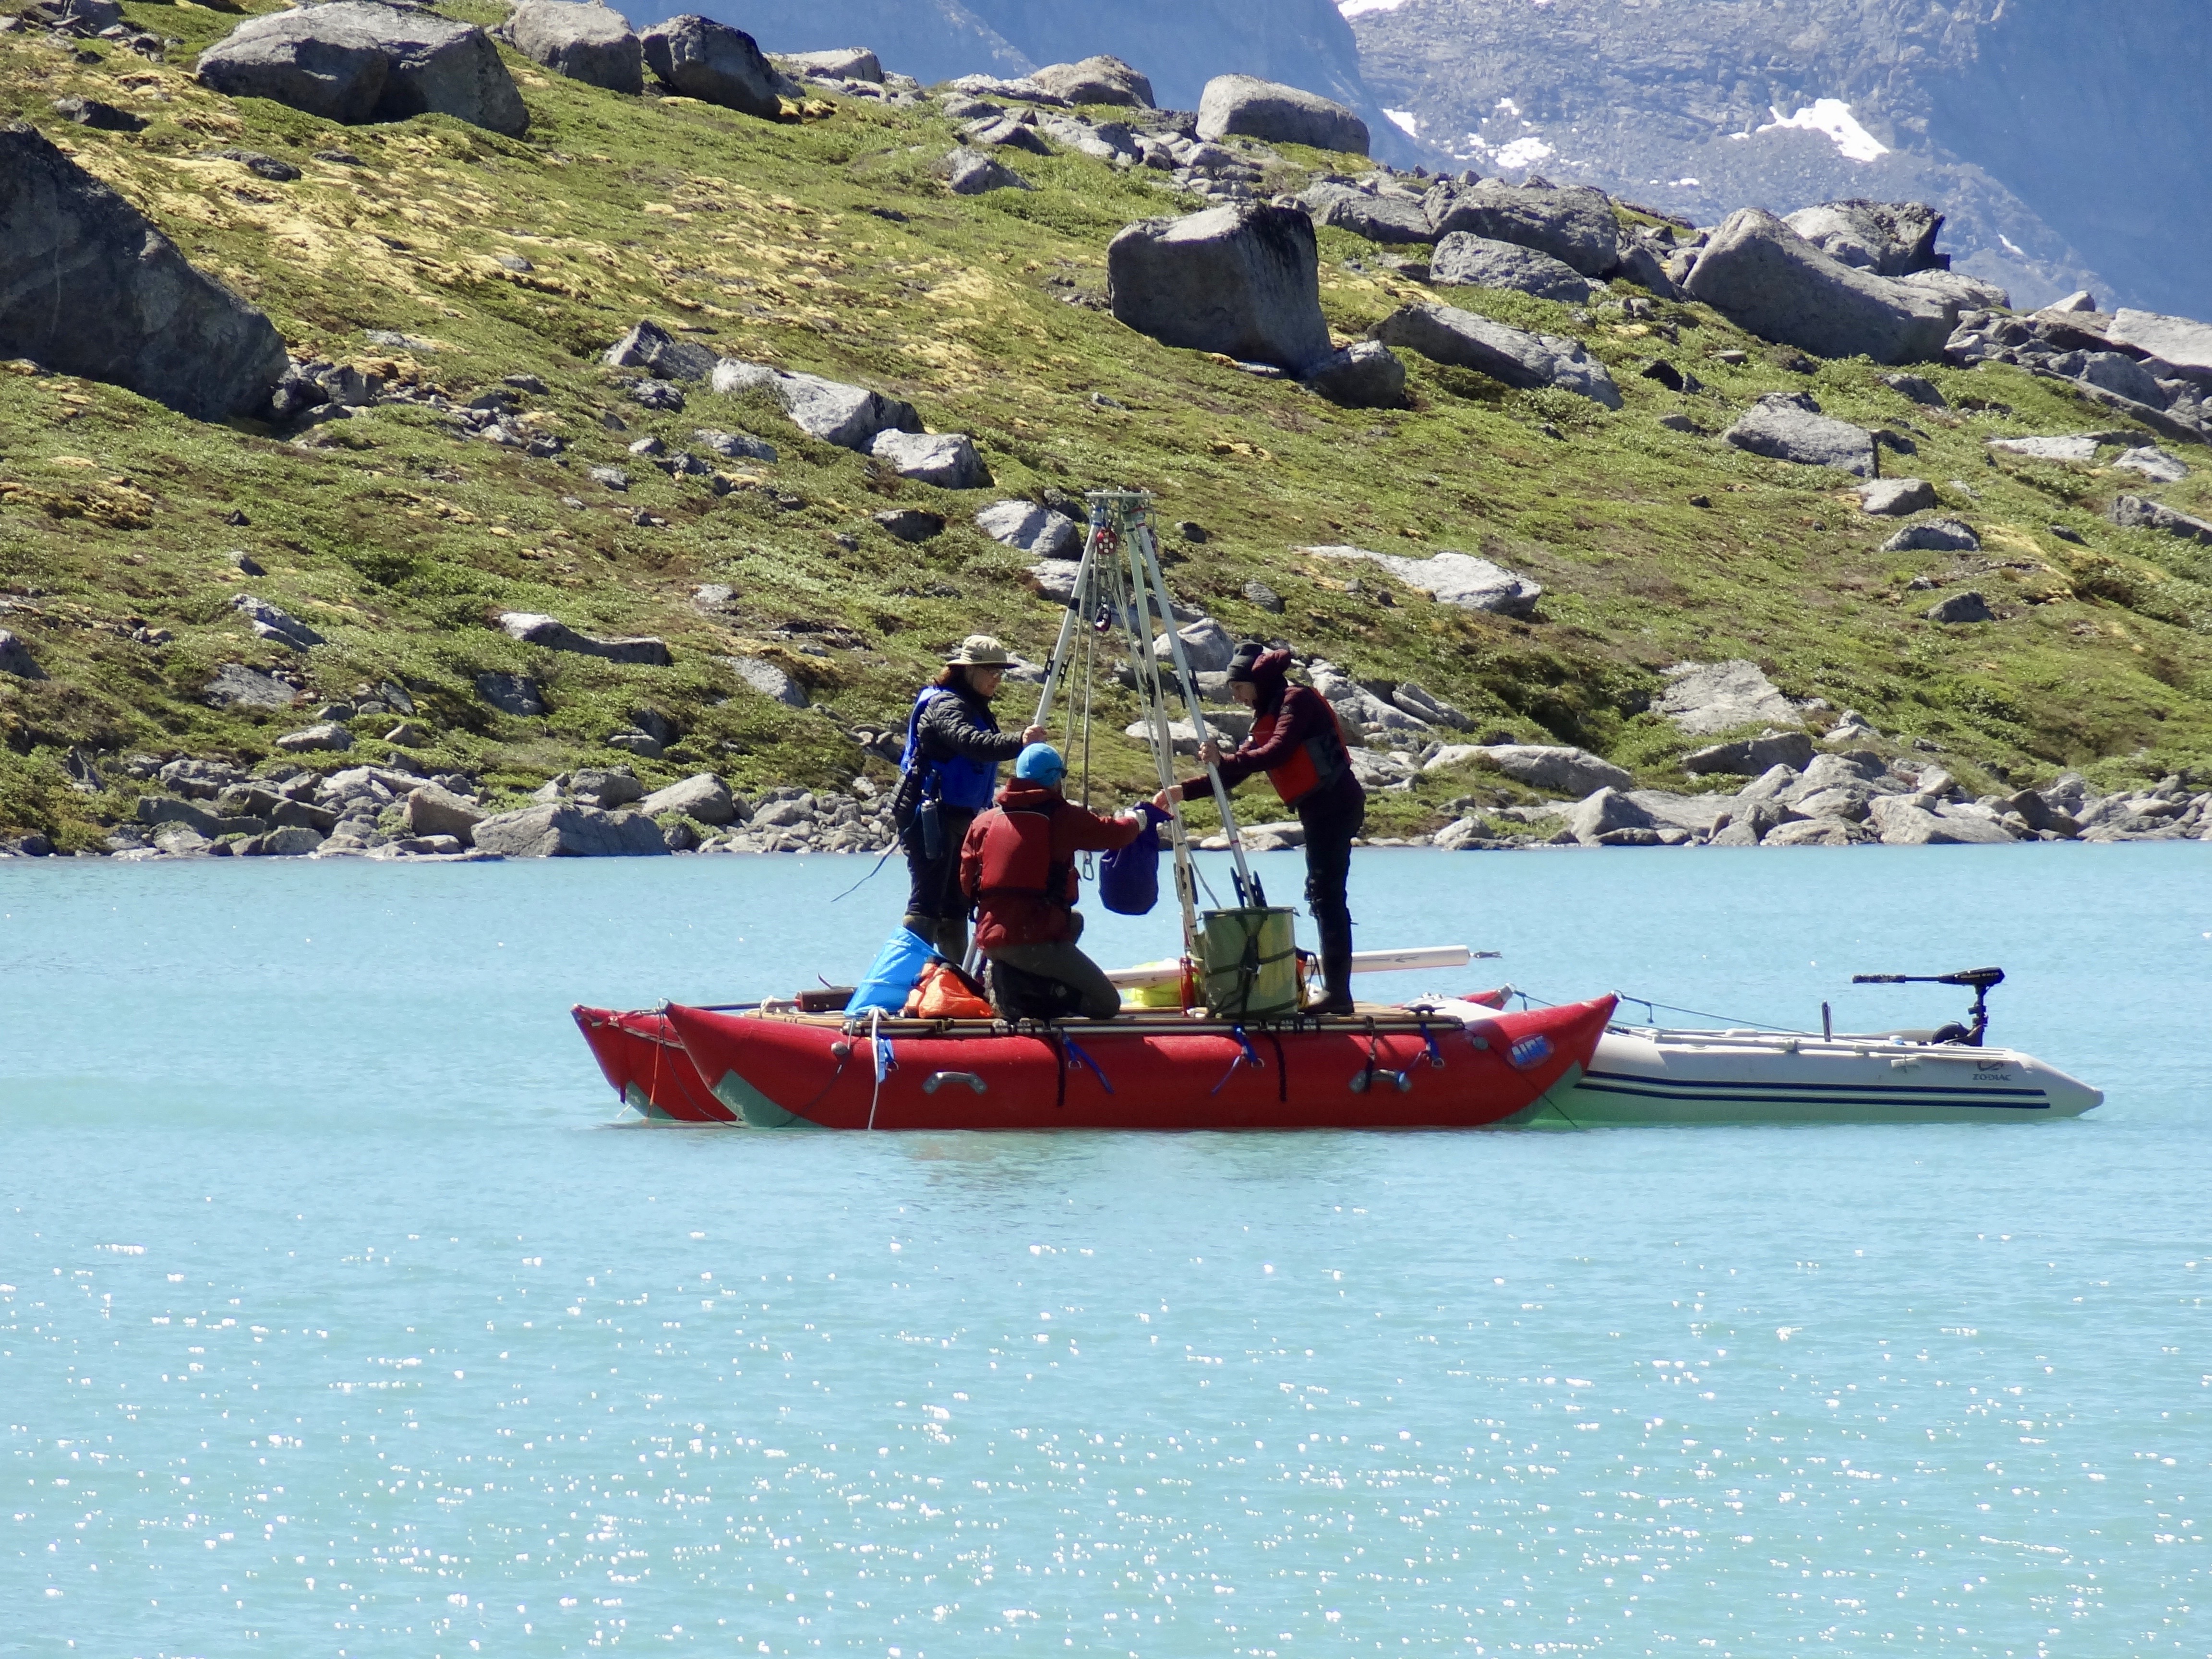 A team on a boat coring lakes in the Arctic (credit: Laura Larocca)